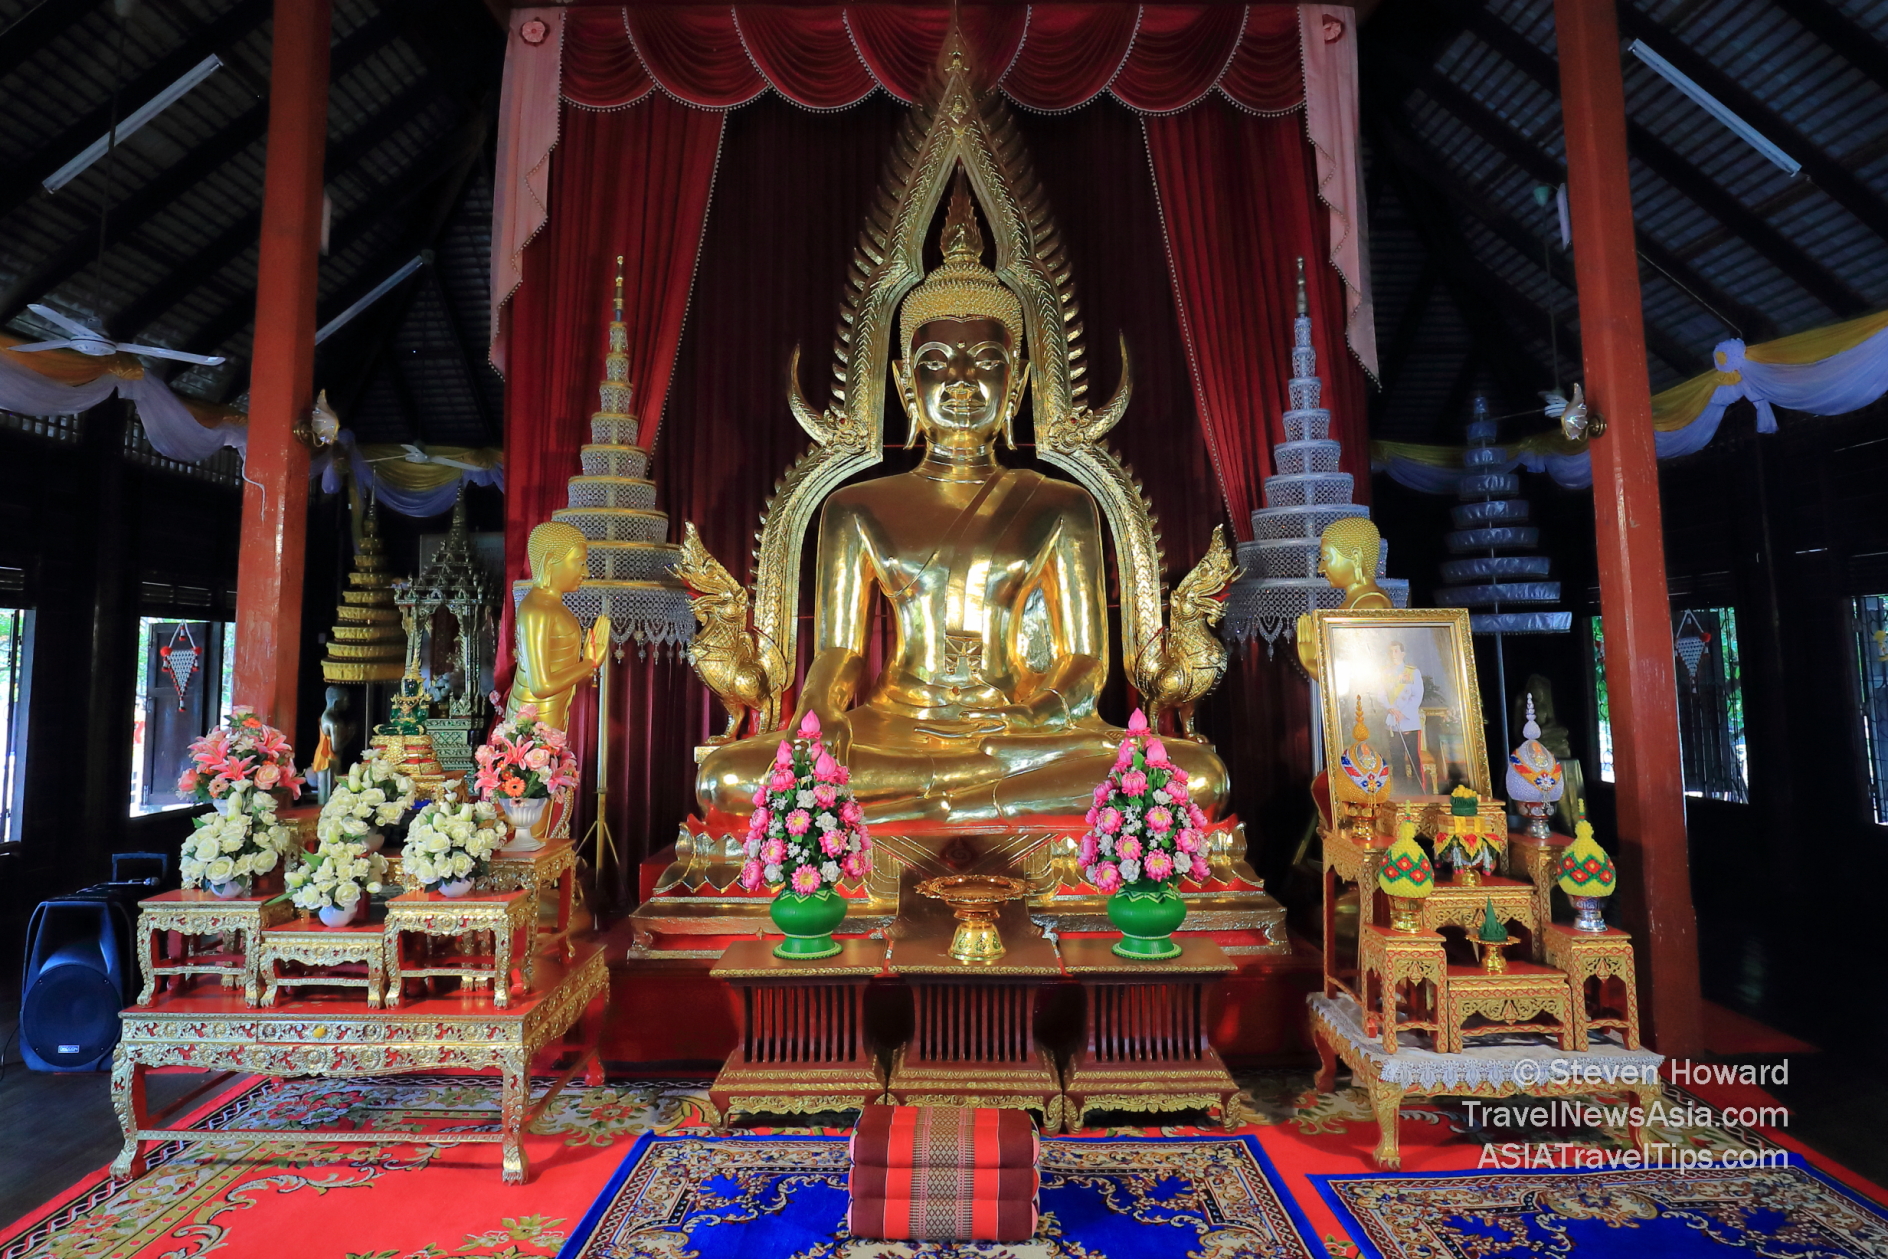 Inside a temple in Ubon Ratchathani, Thailand. Picture by Steven Howard of TravelNewsAsia.com Click to enlarge.